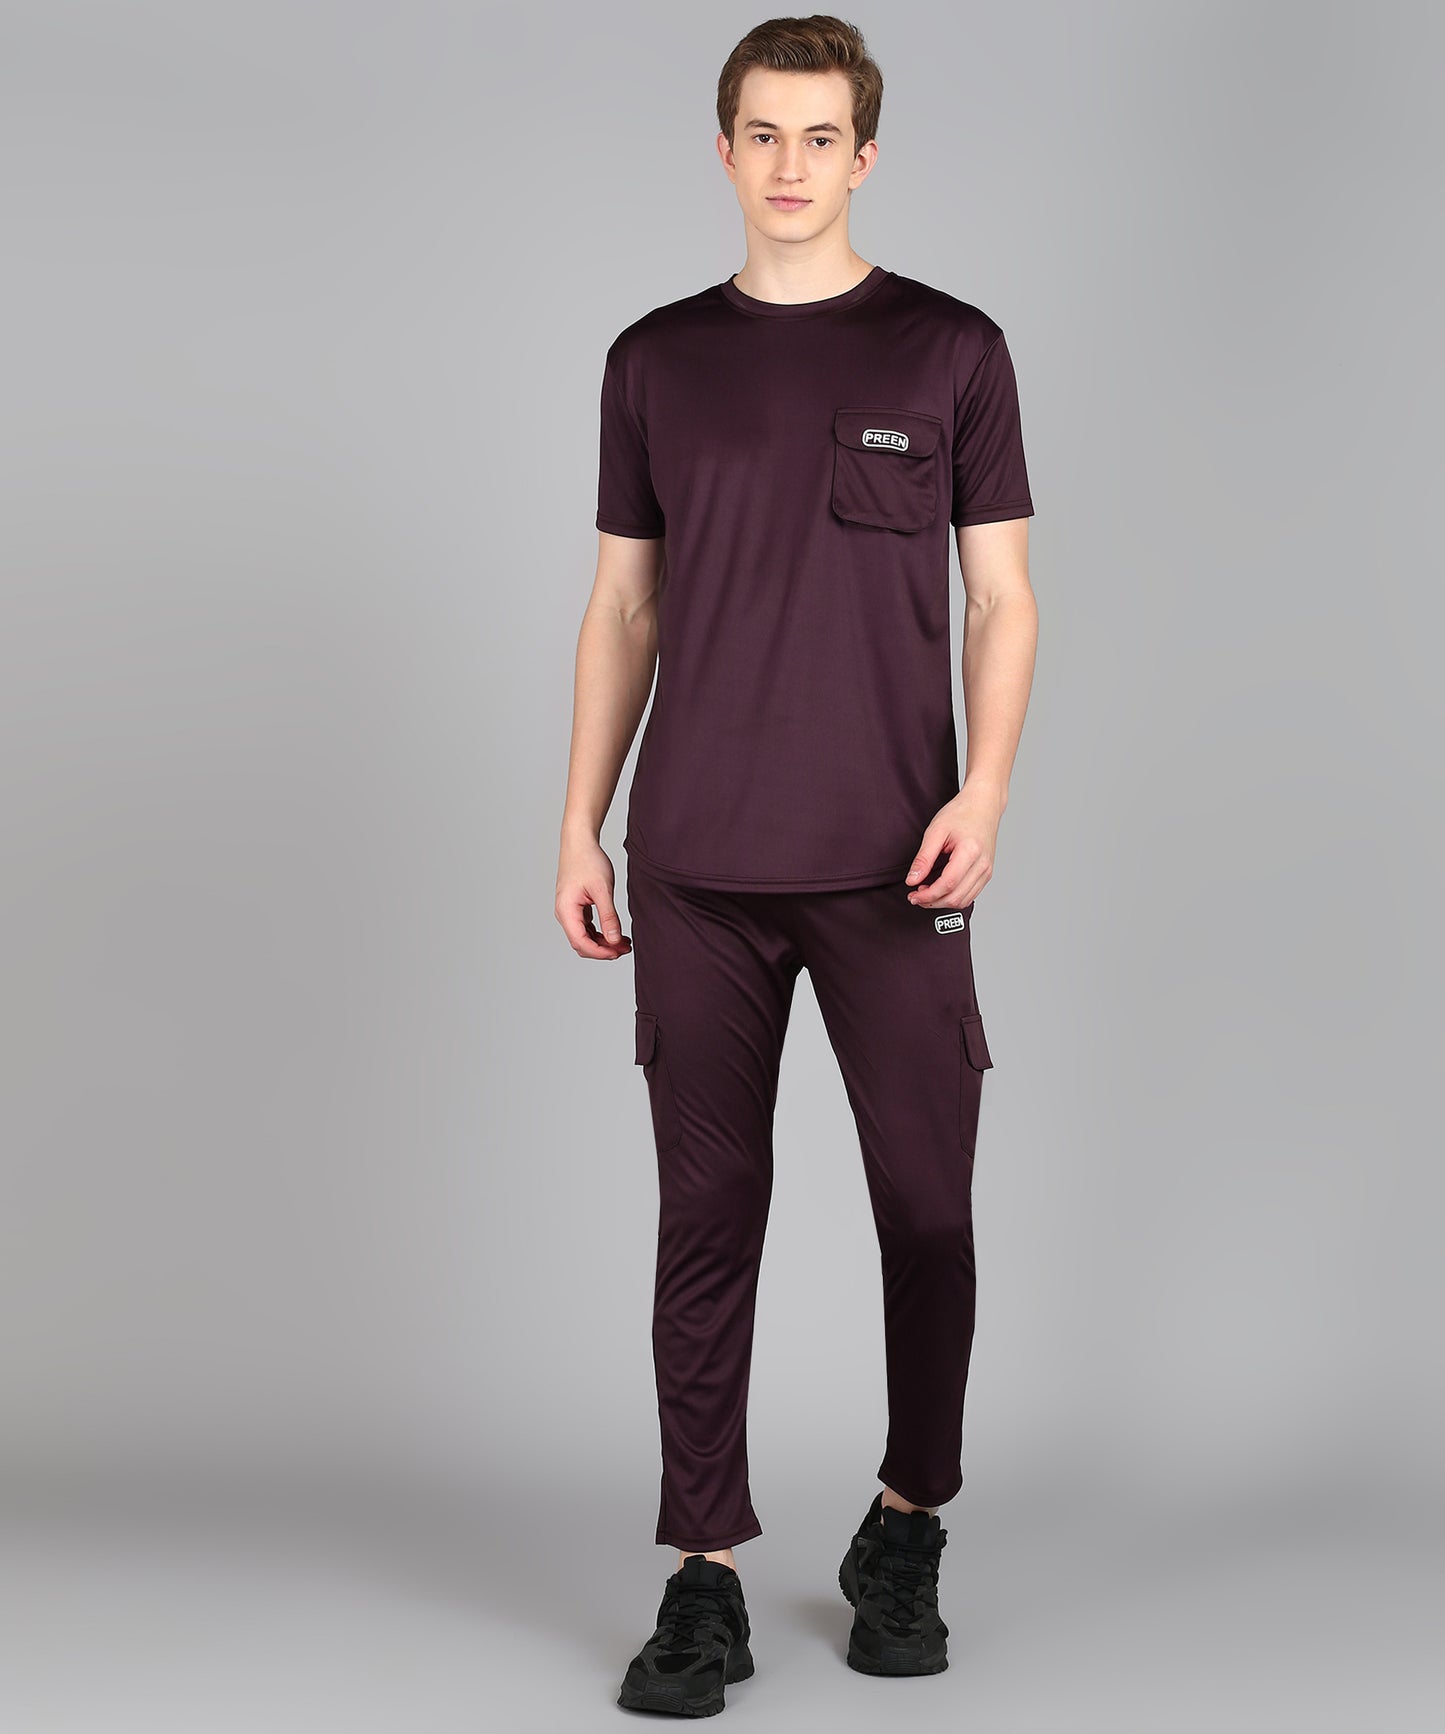 Preen Men's Maroon Colour Solid T-shirt and Lower Set